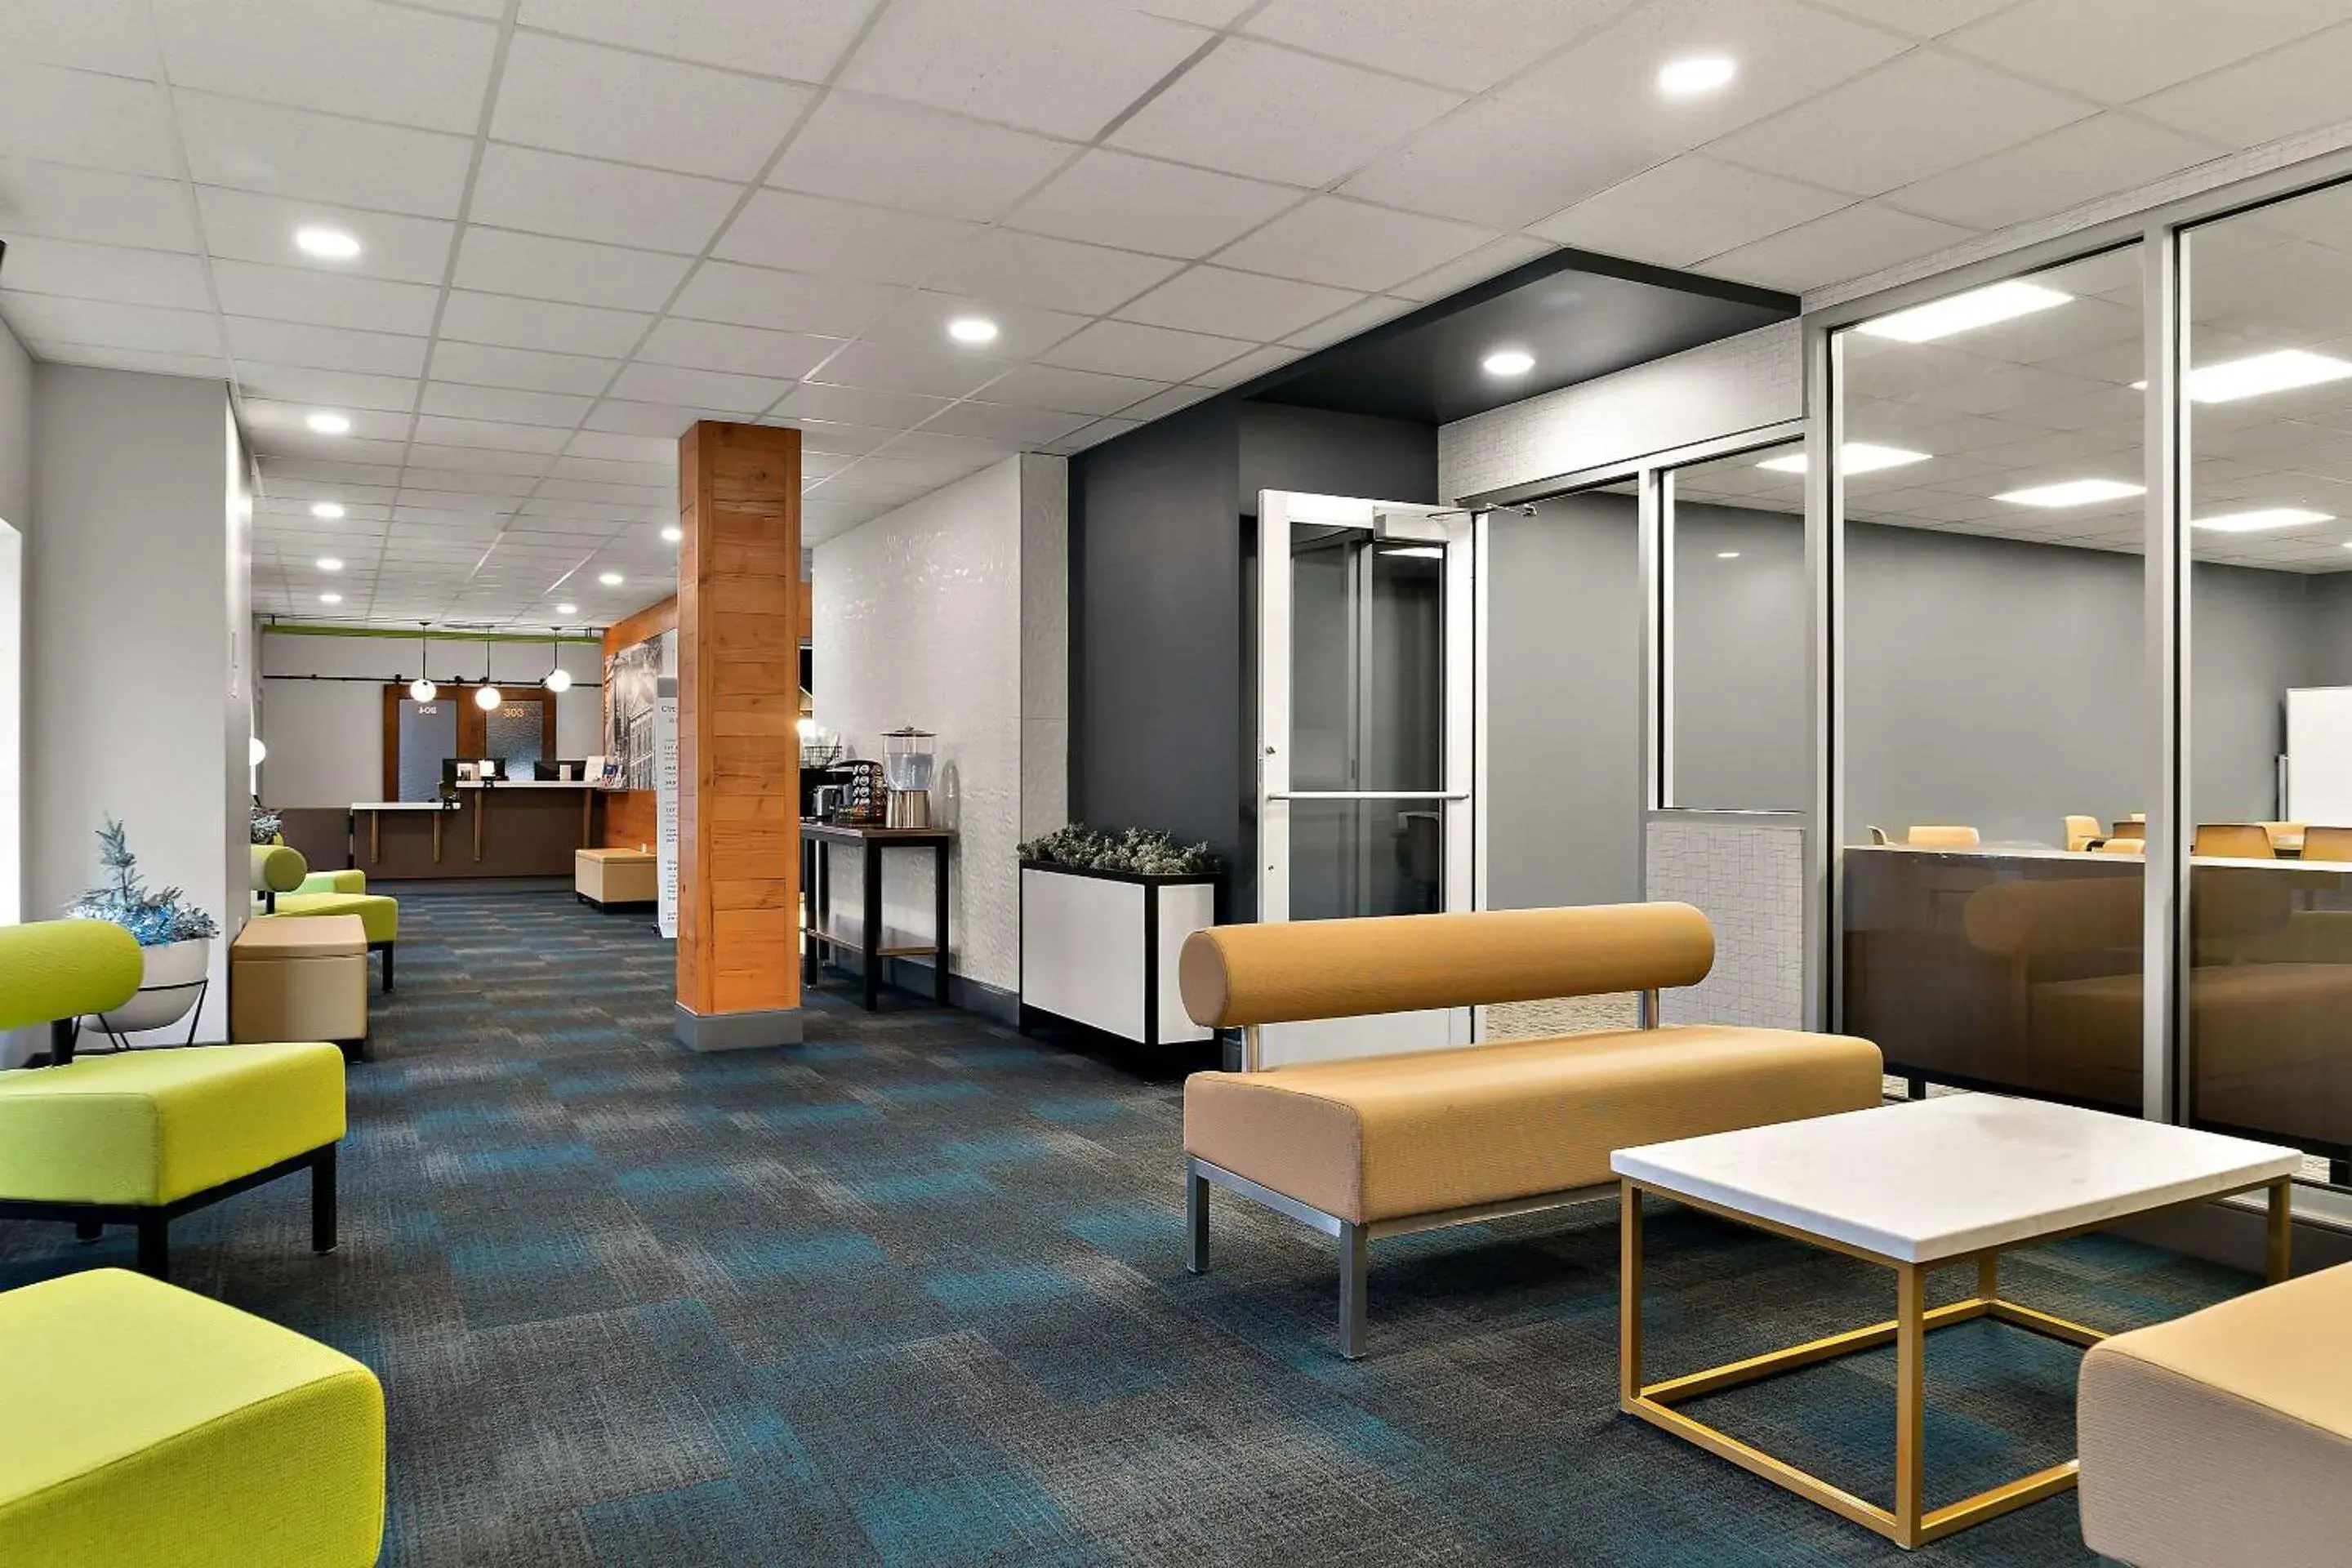 Lobby or reception in CityFlatsHotel - Port Huron, Ascend Hotel Collection